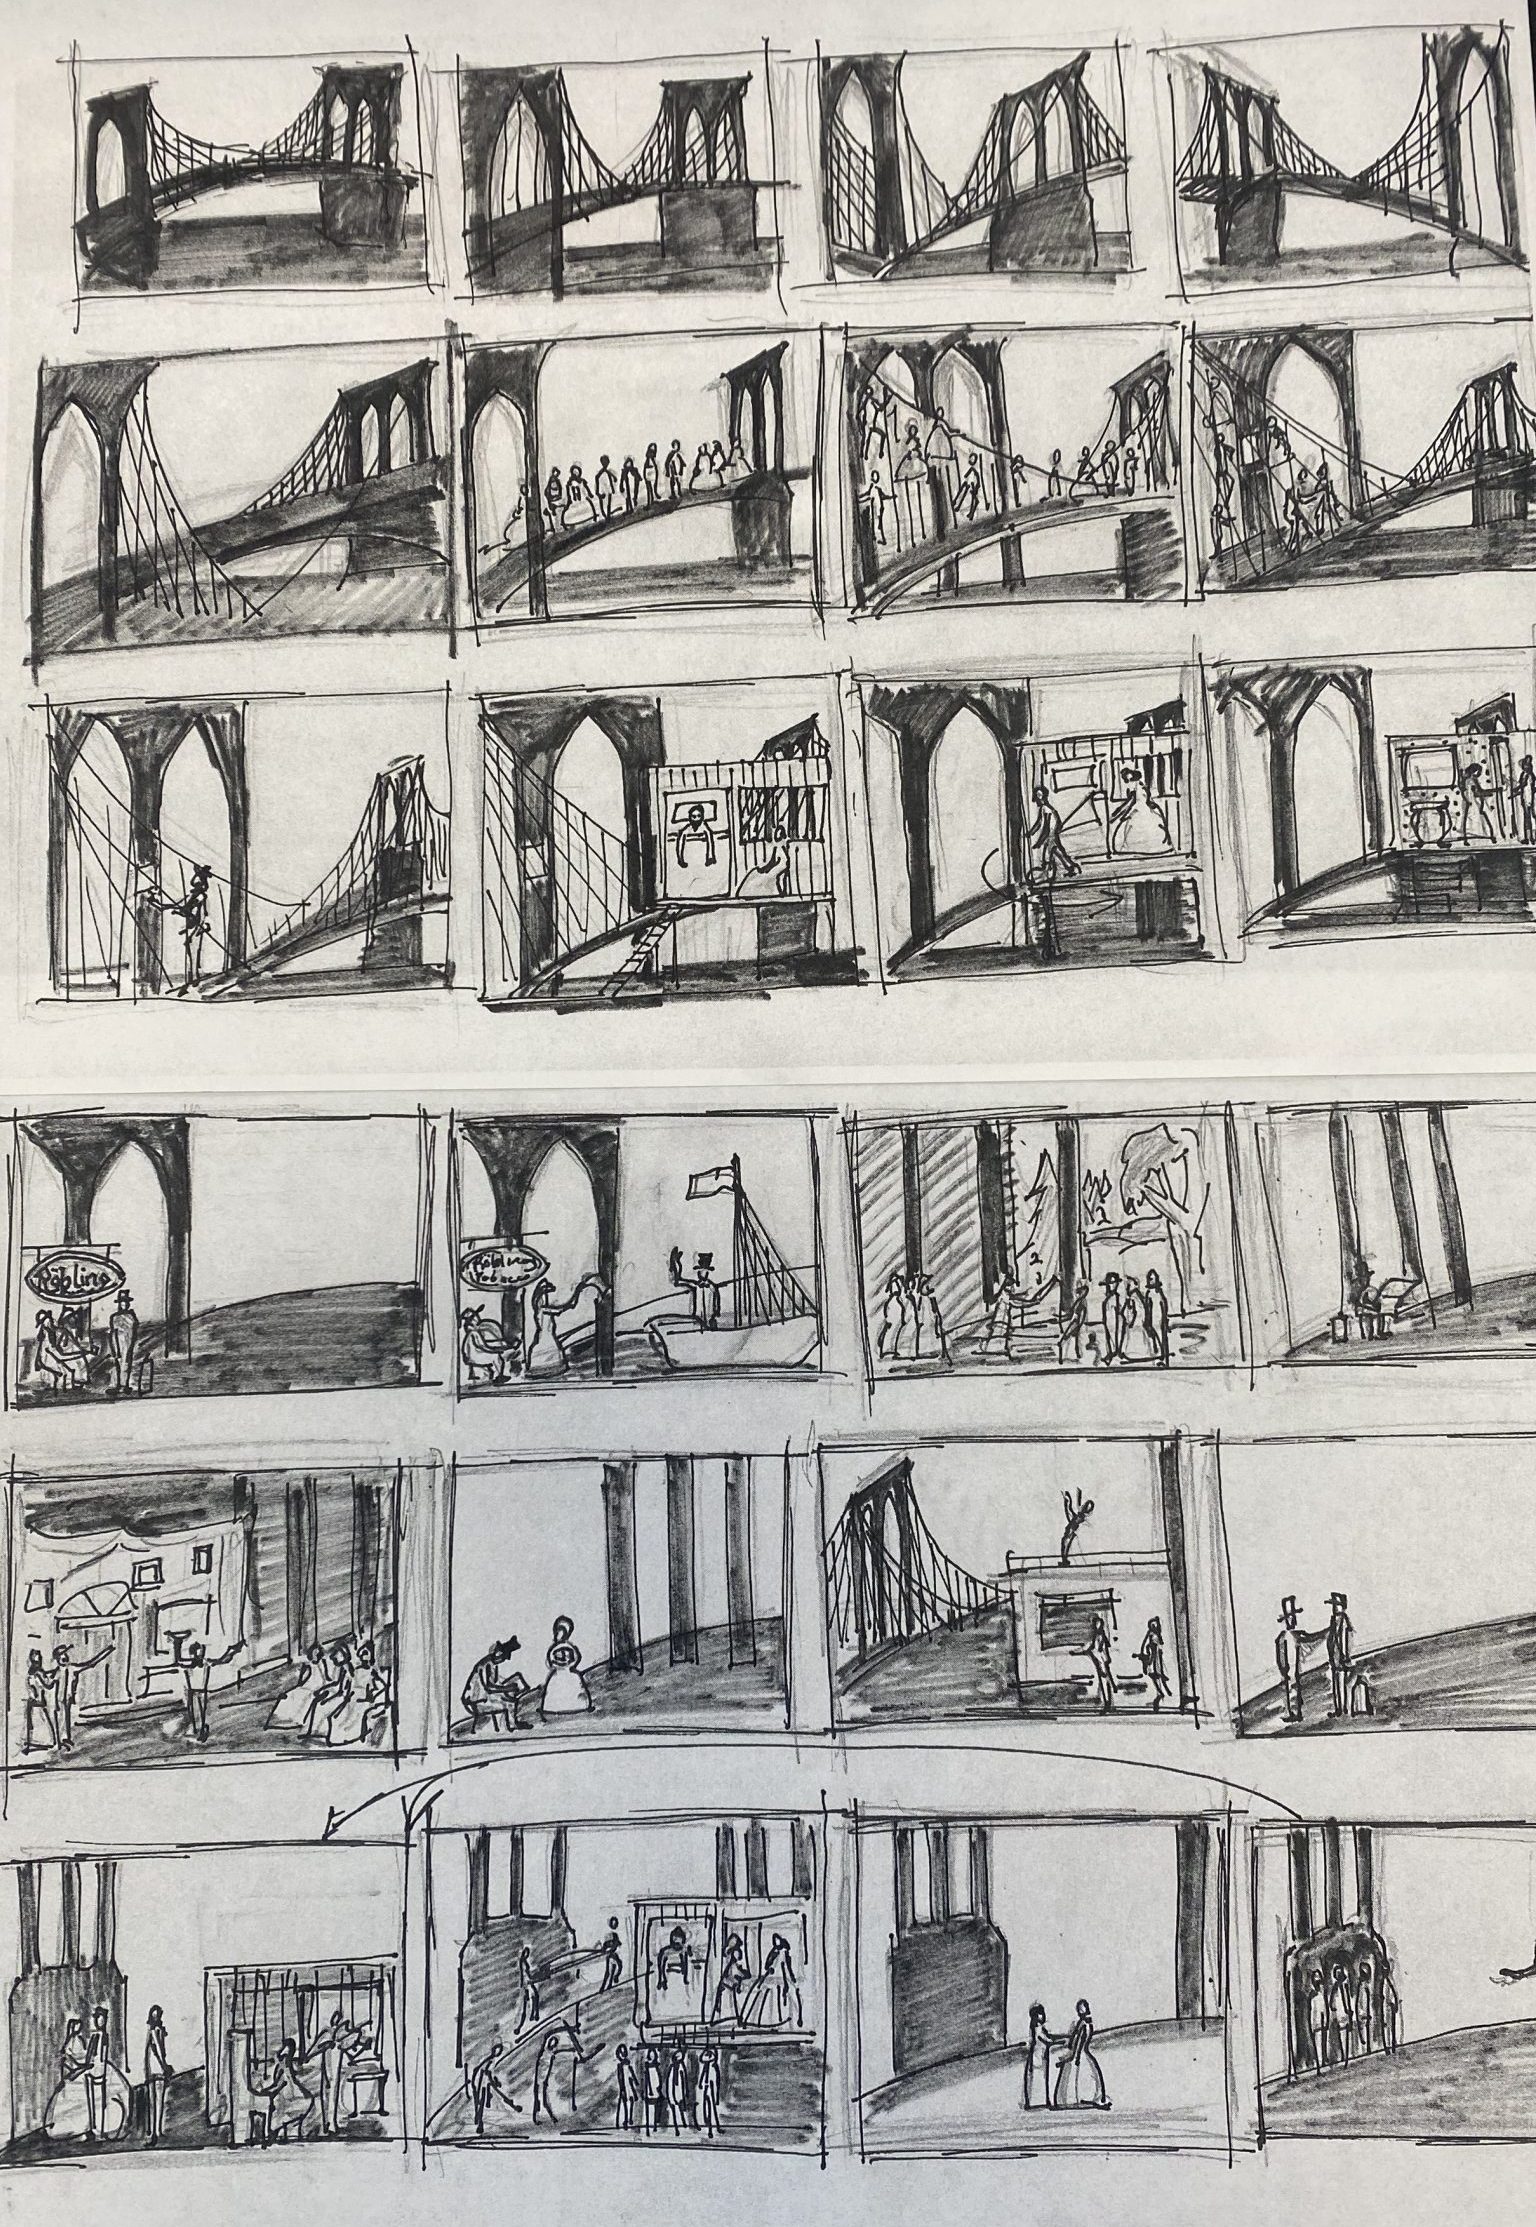 Pencil drawings found next to script drafts of ‘The Bridge'